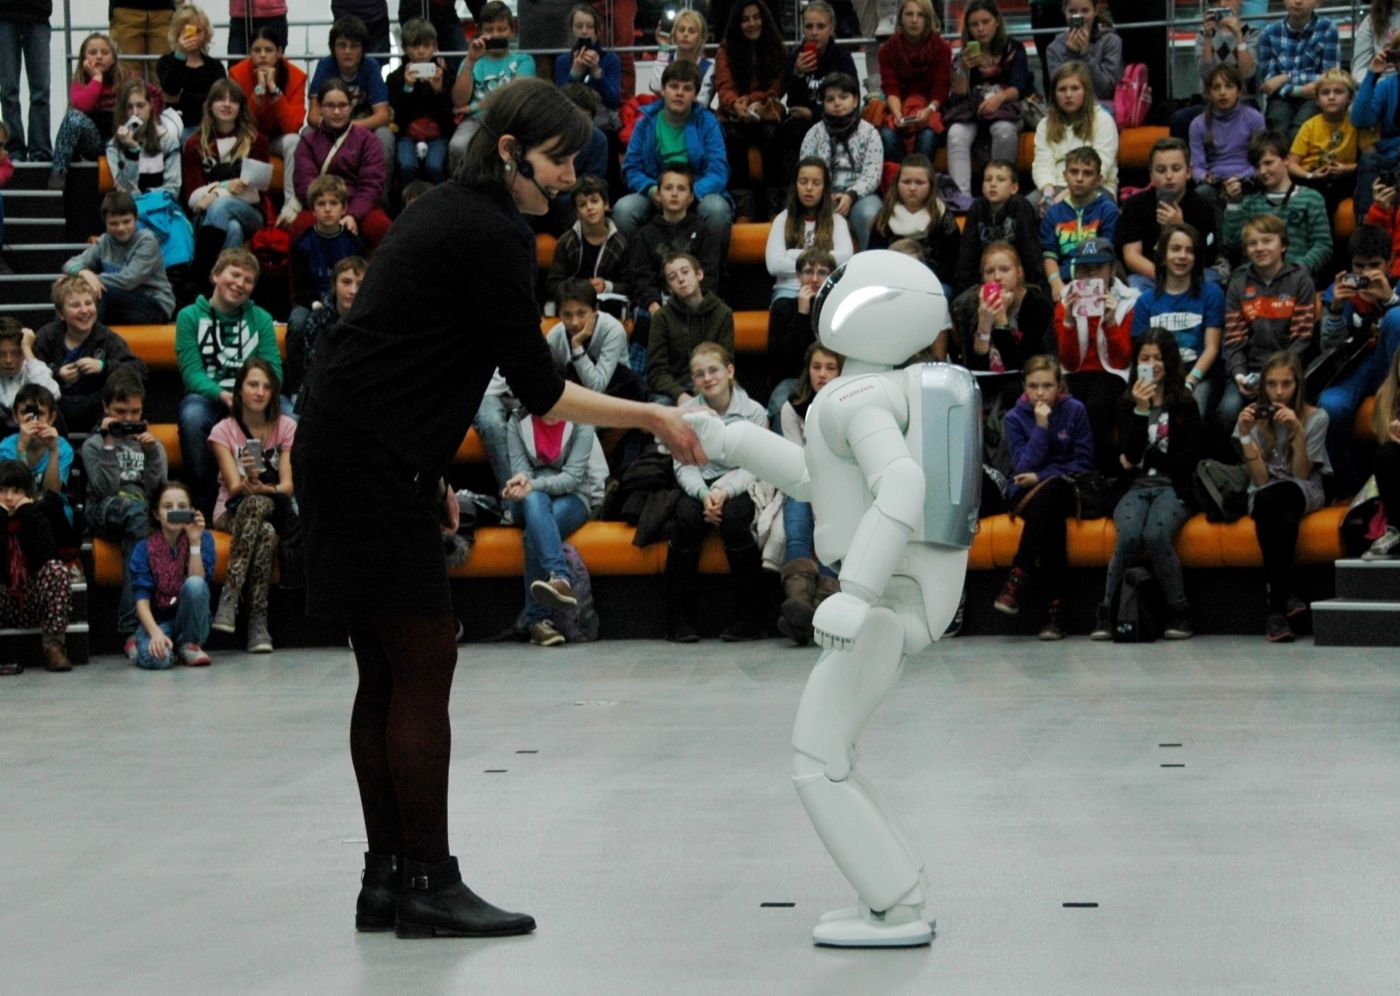 All-New ASIMO Joins in the Celebrations at Czech Science Centre